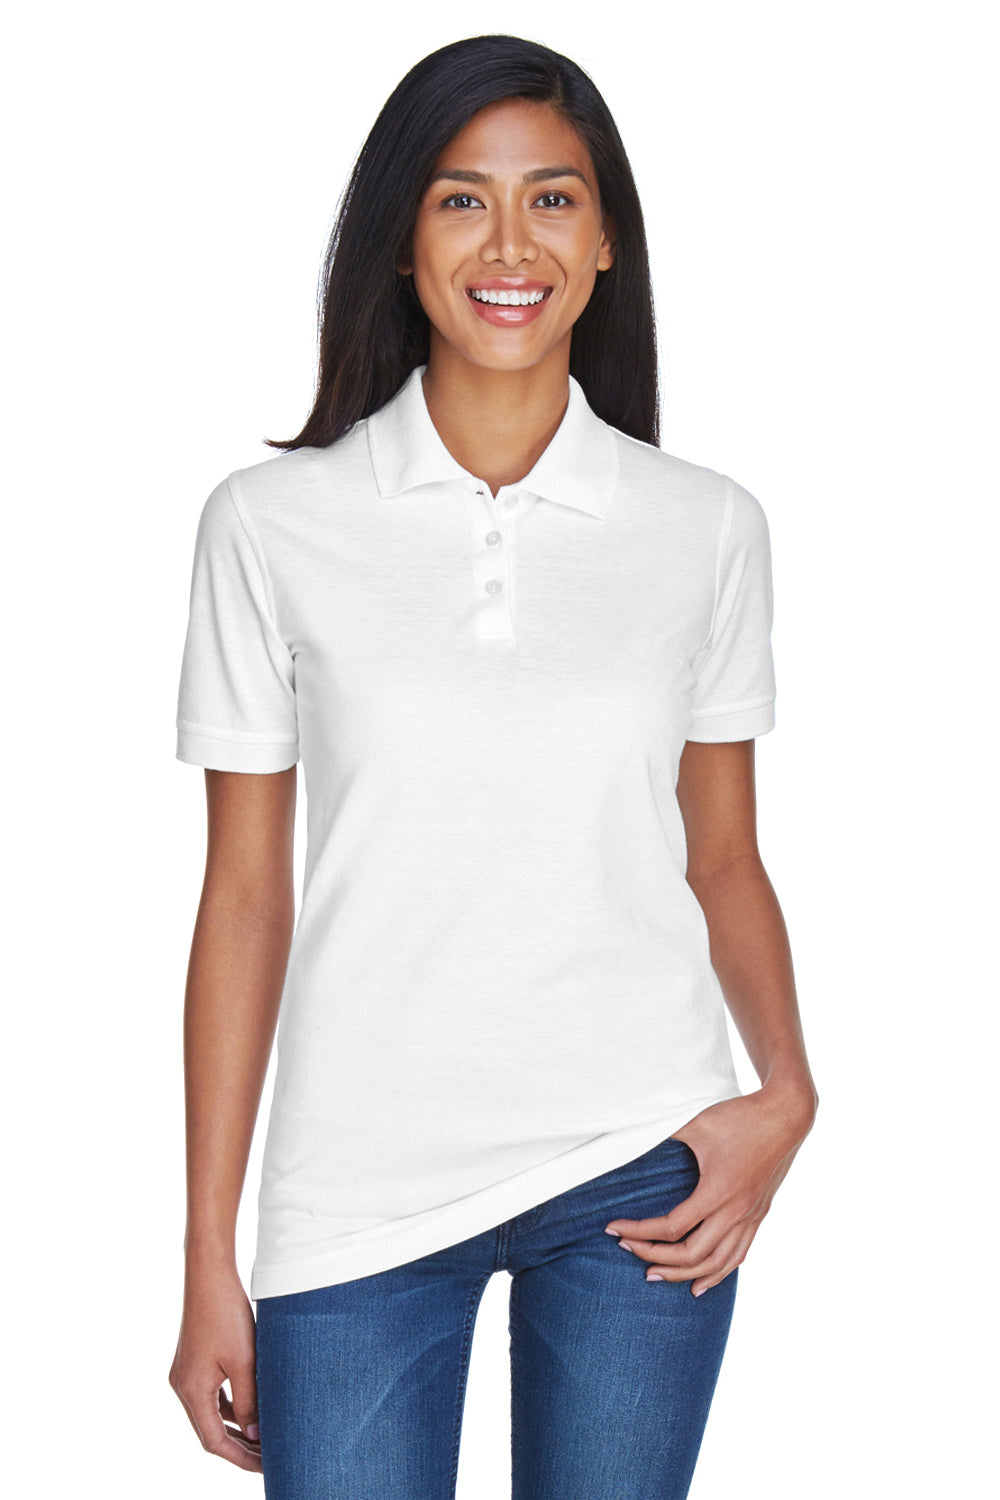 UltraClub 8530 Womens Classic Short Sleeve Polo Shirt White Front